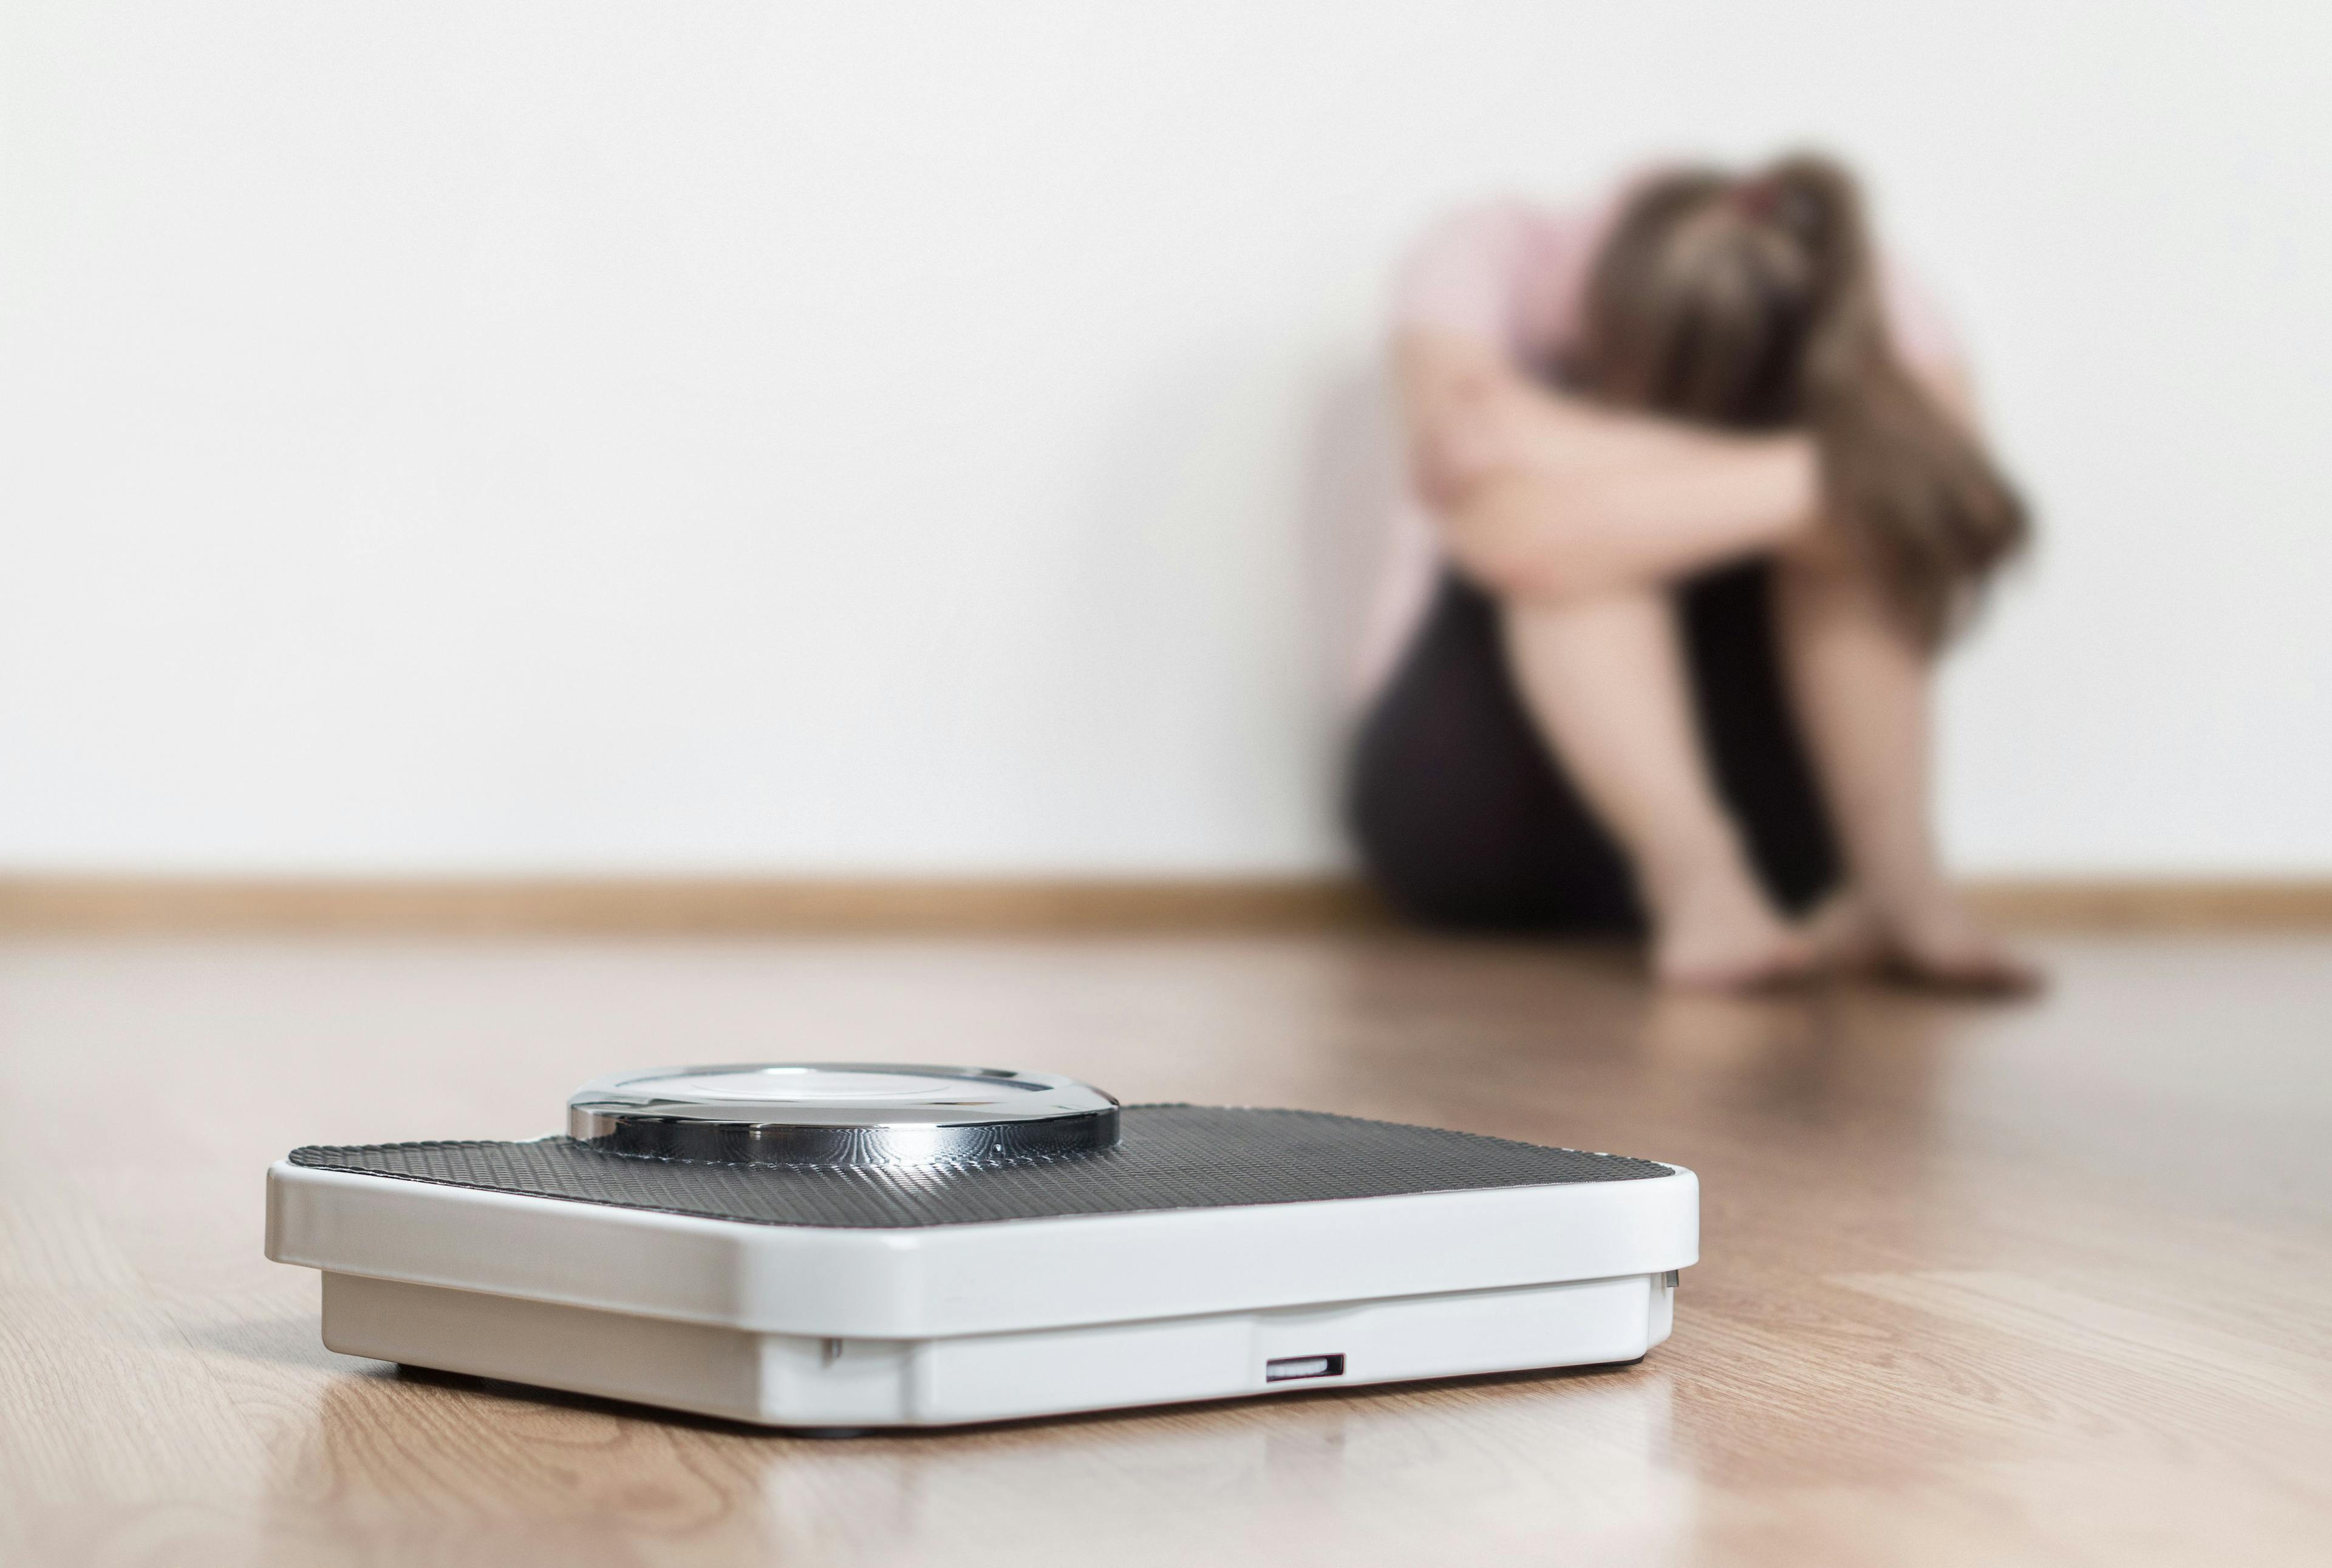 Model of Anorexia Nervosa/Anxiety About Weight | image credit: terovesalainen - stock.adobe.com